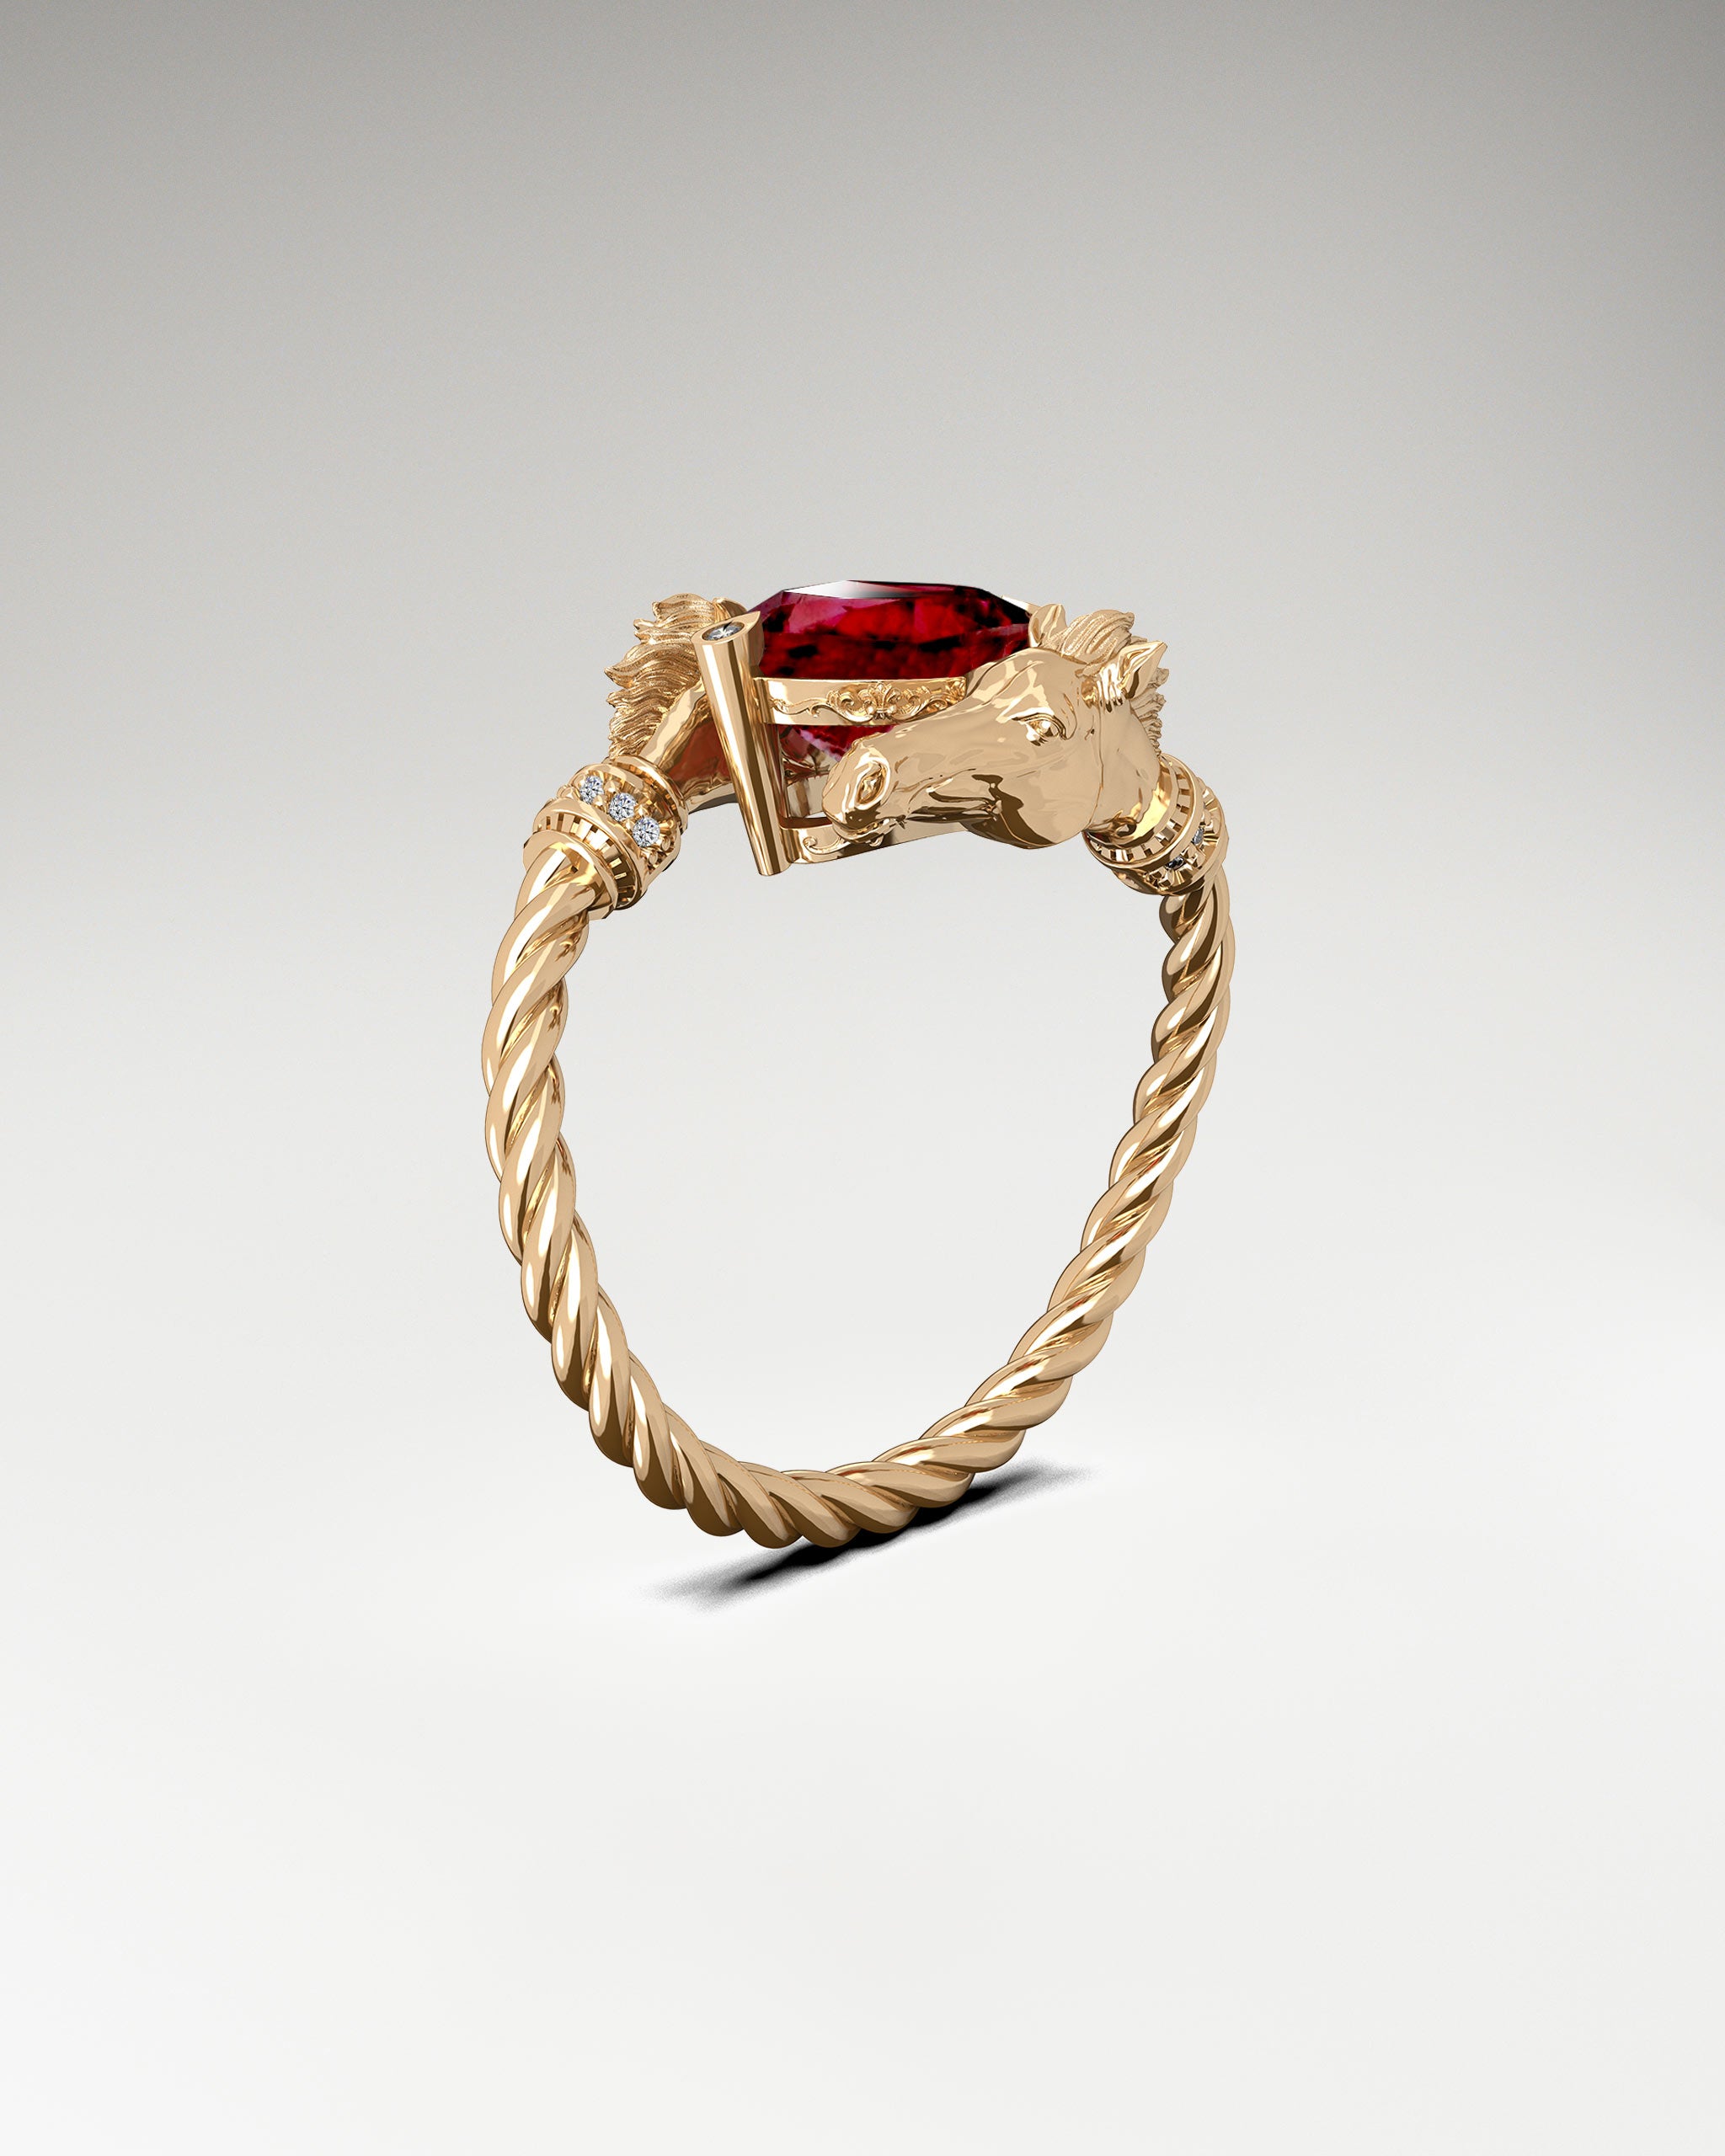 Dual Peppy Ring in 10k Gold With Rose Garnet